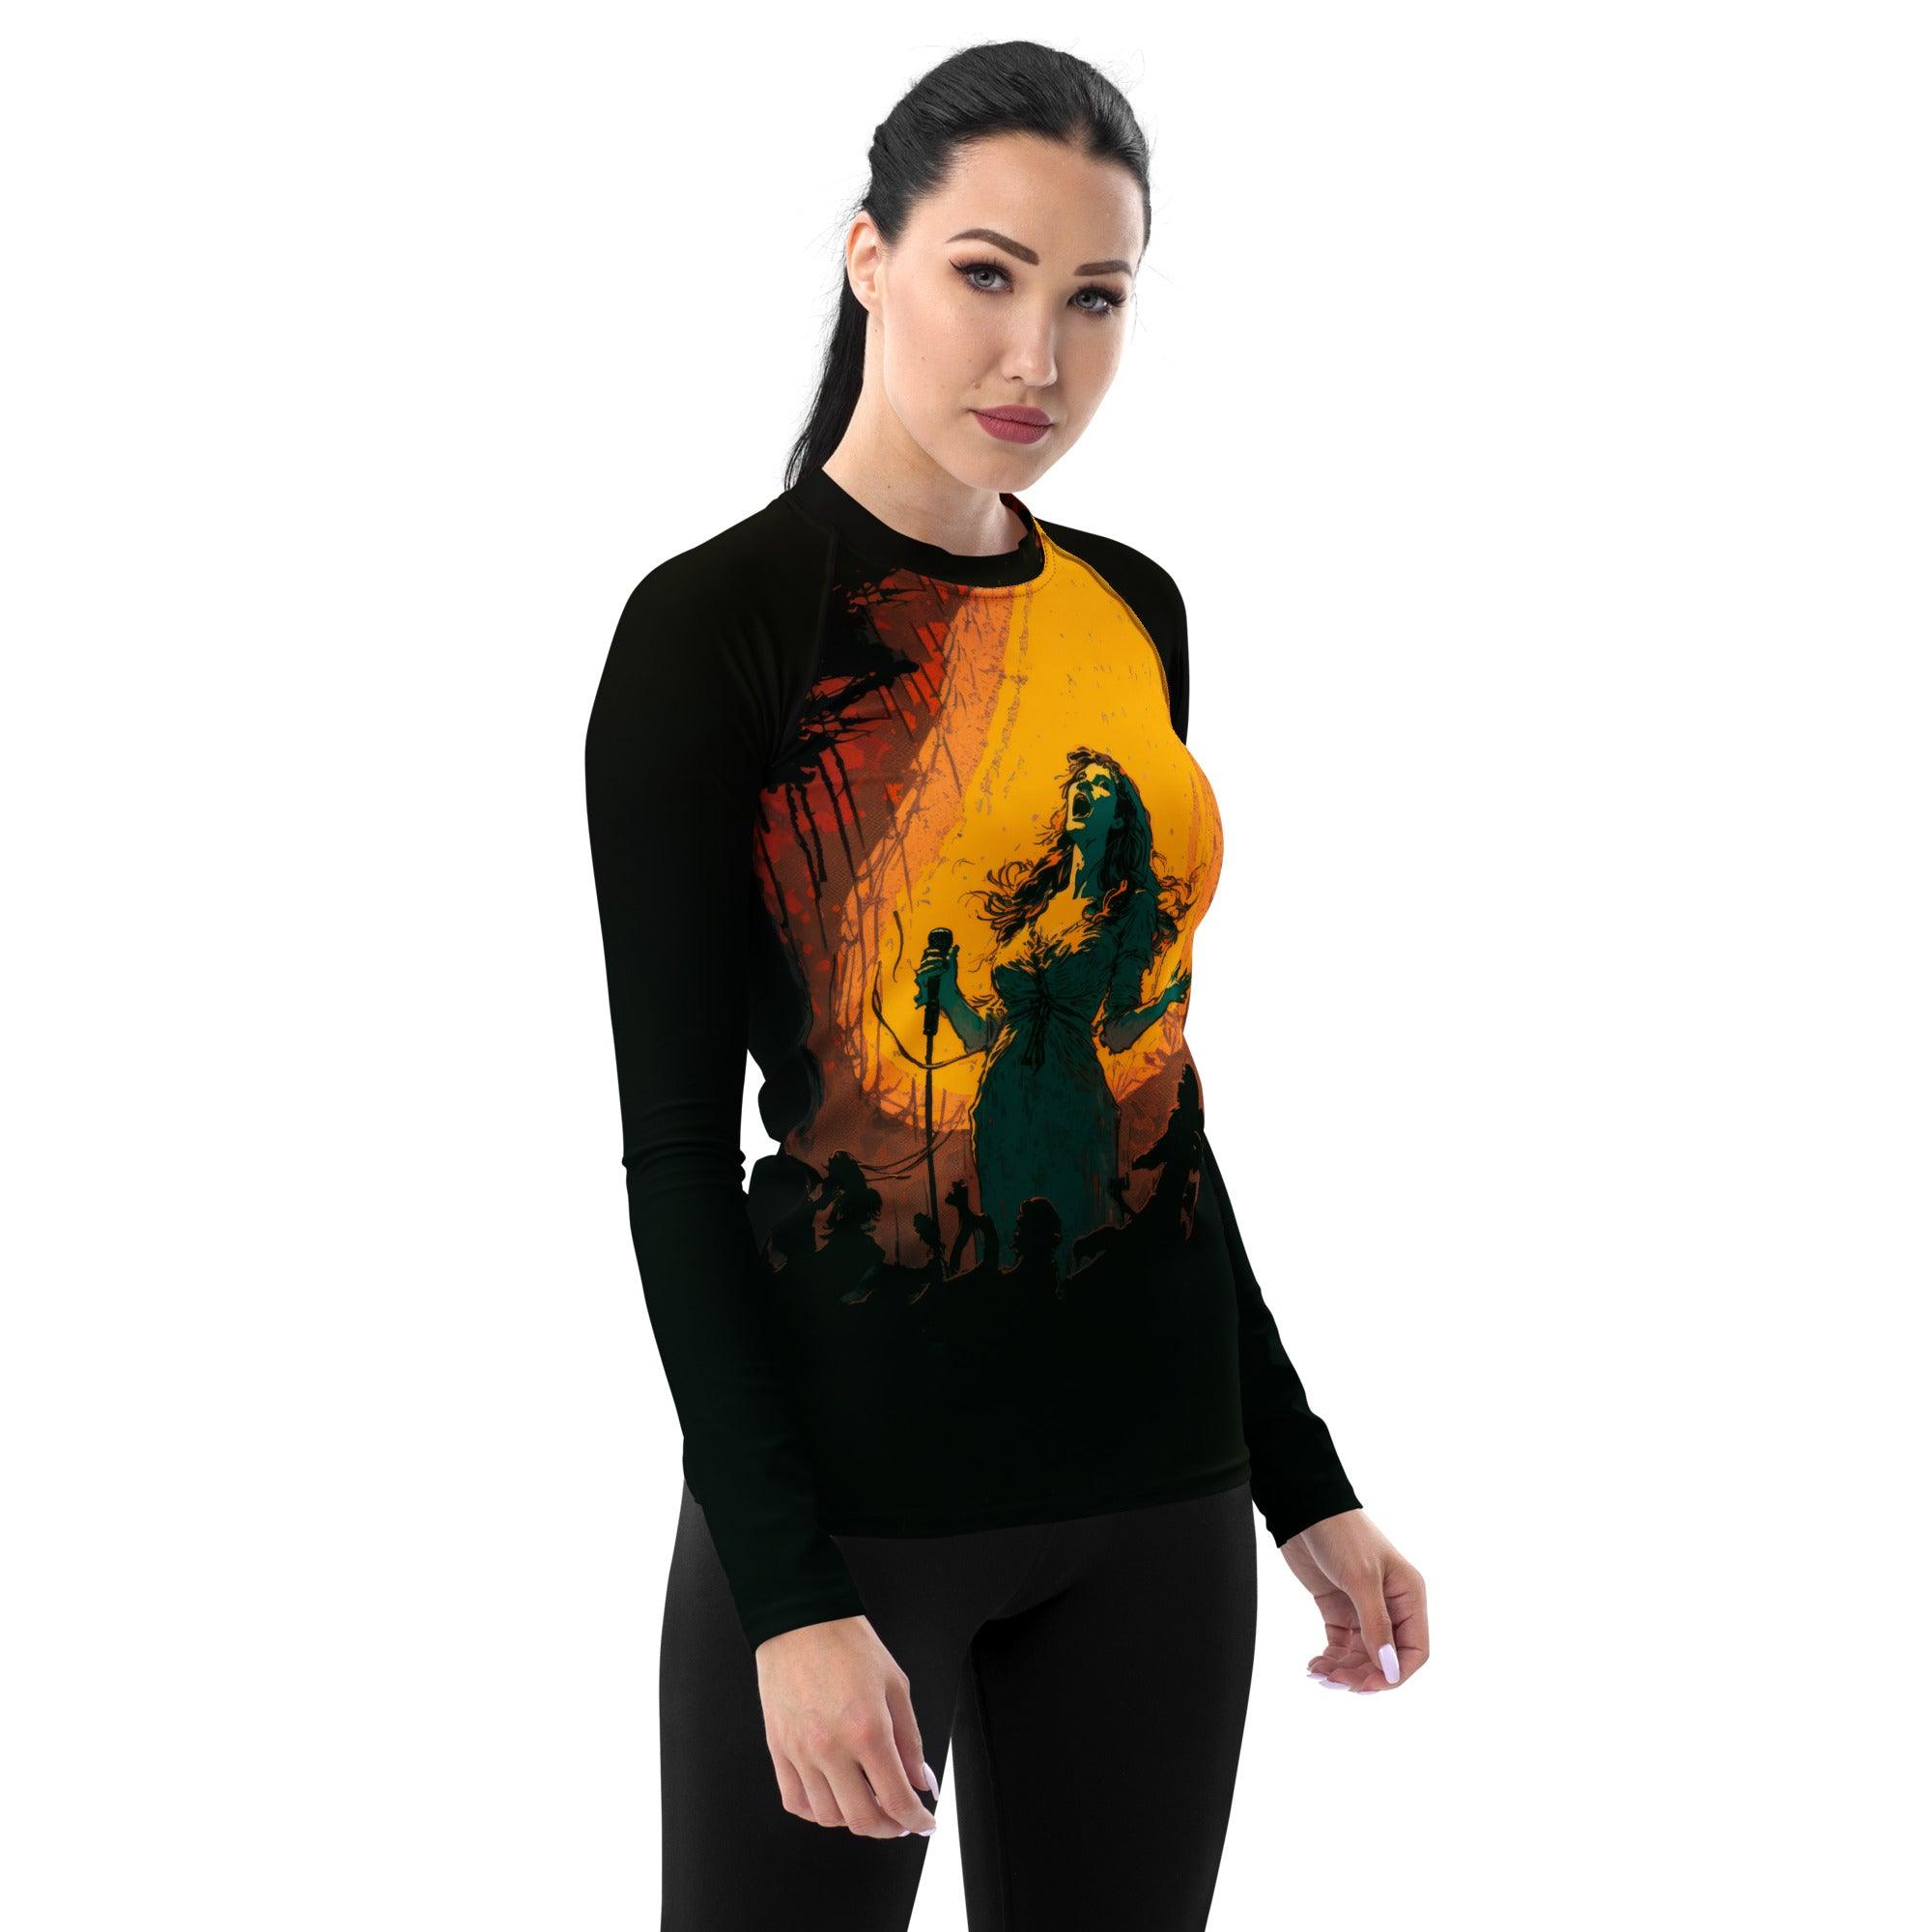 Rock the Waves in our Women's Music Lover Rash Guard - Beyond T-shirts